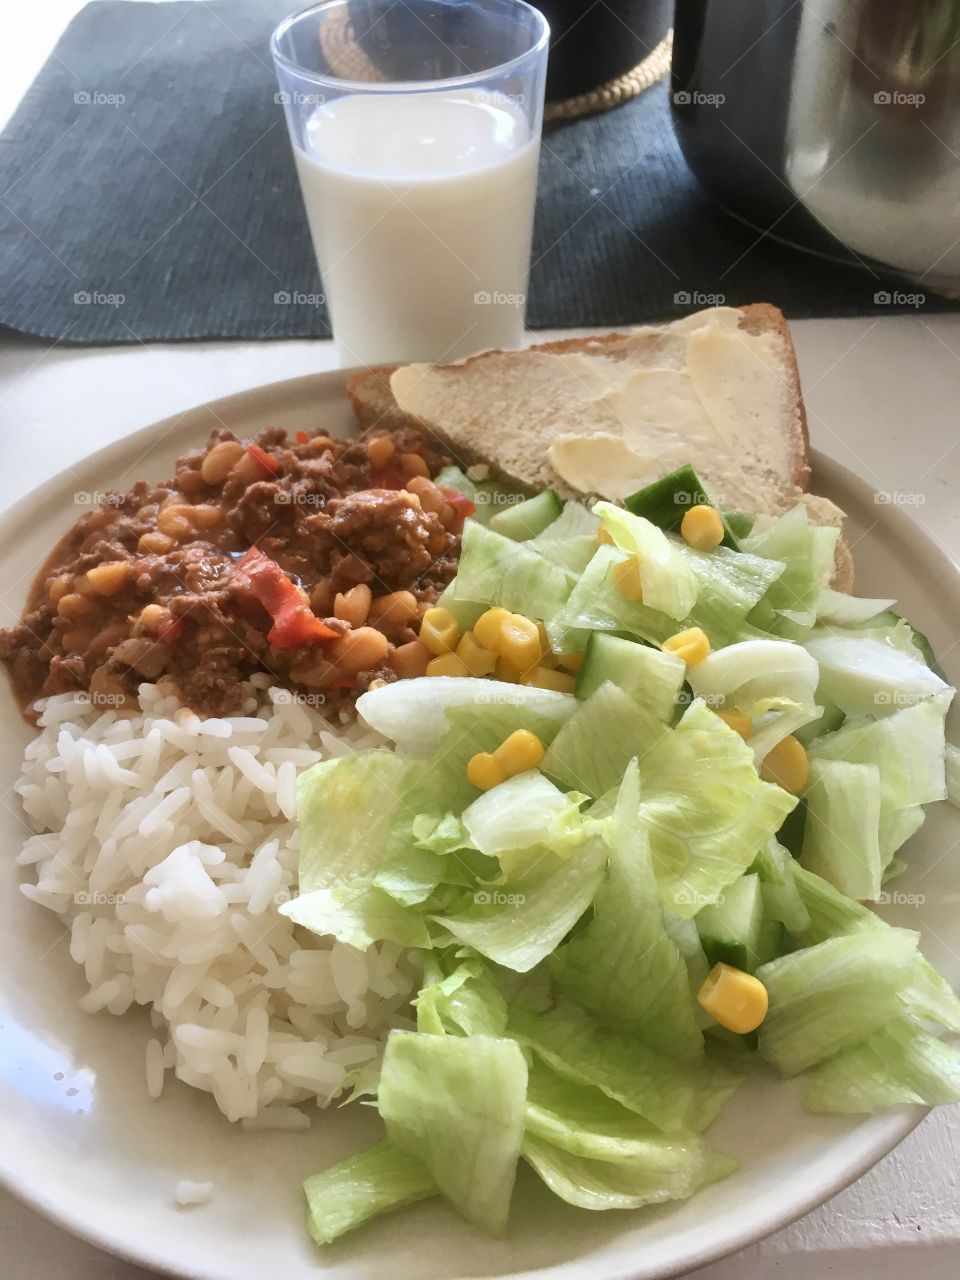 Todays dinner was chili con carne